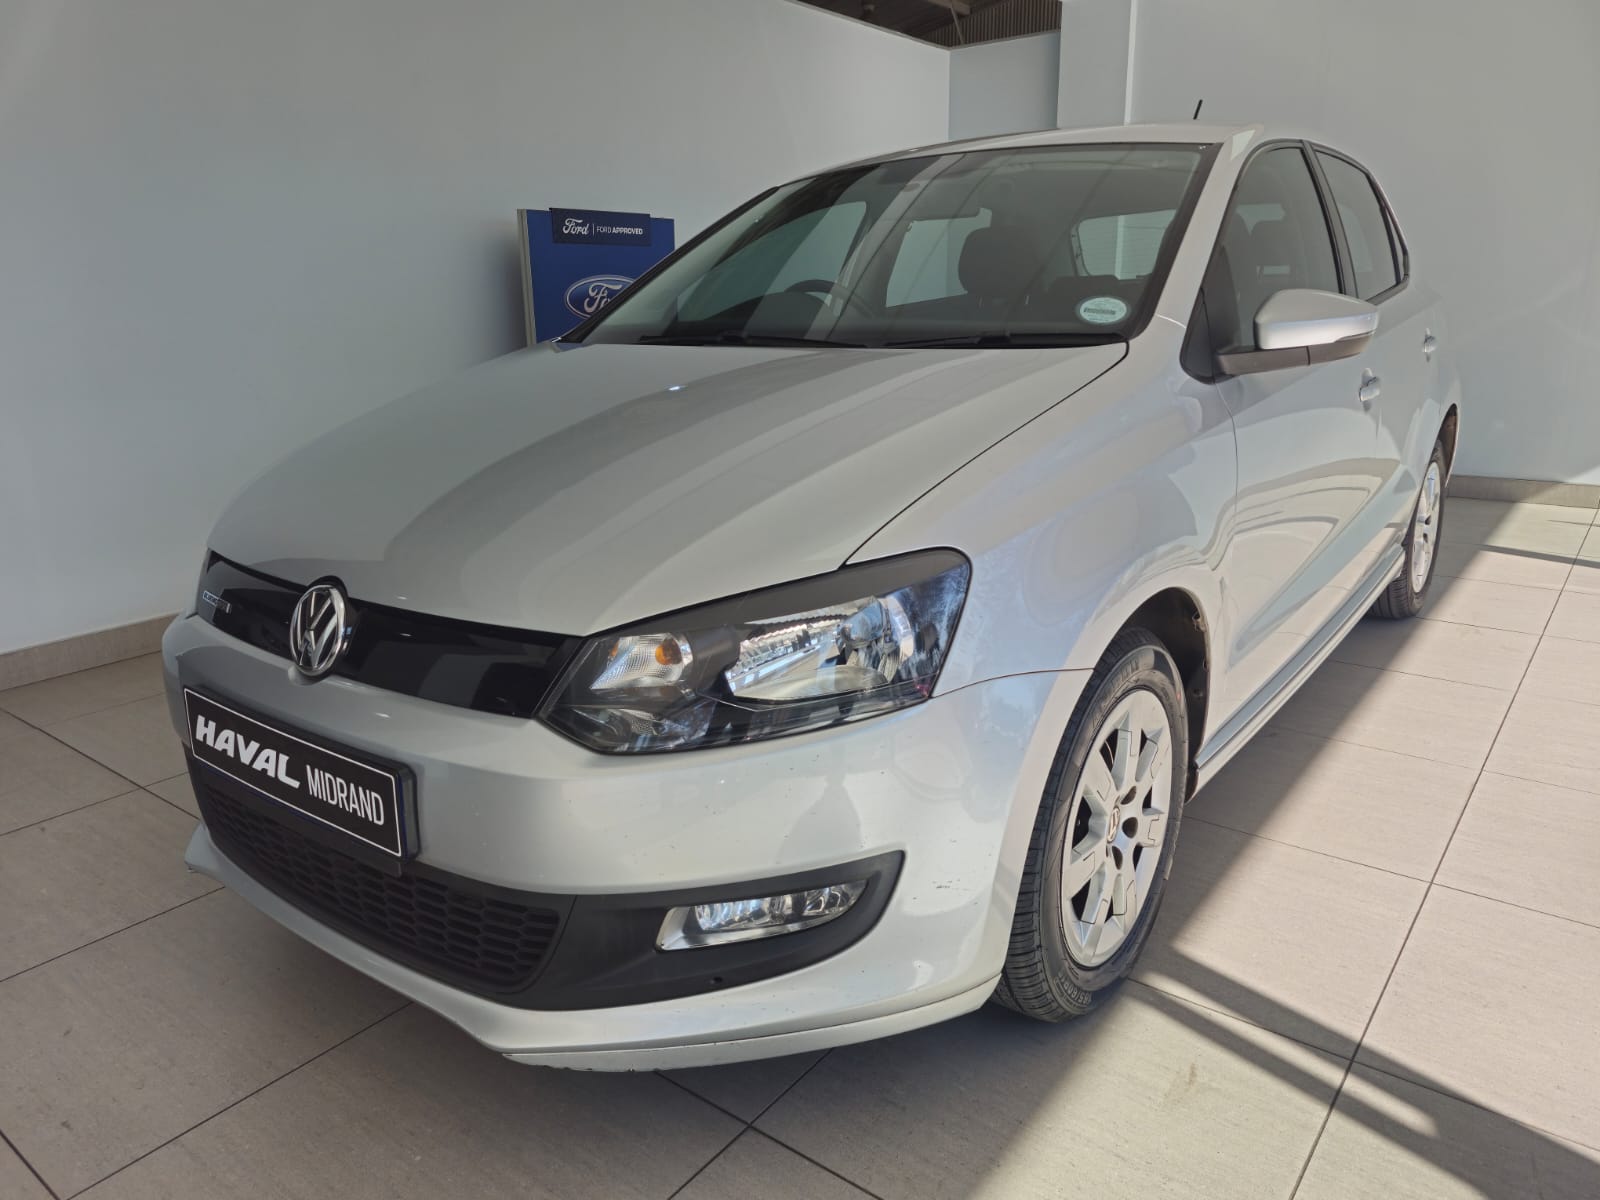 2014 Volkswagen Polo Hatch  for sale - UF70898